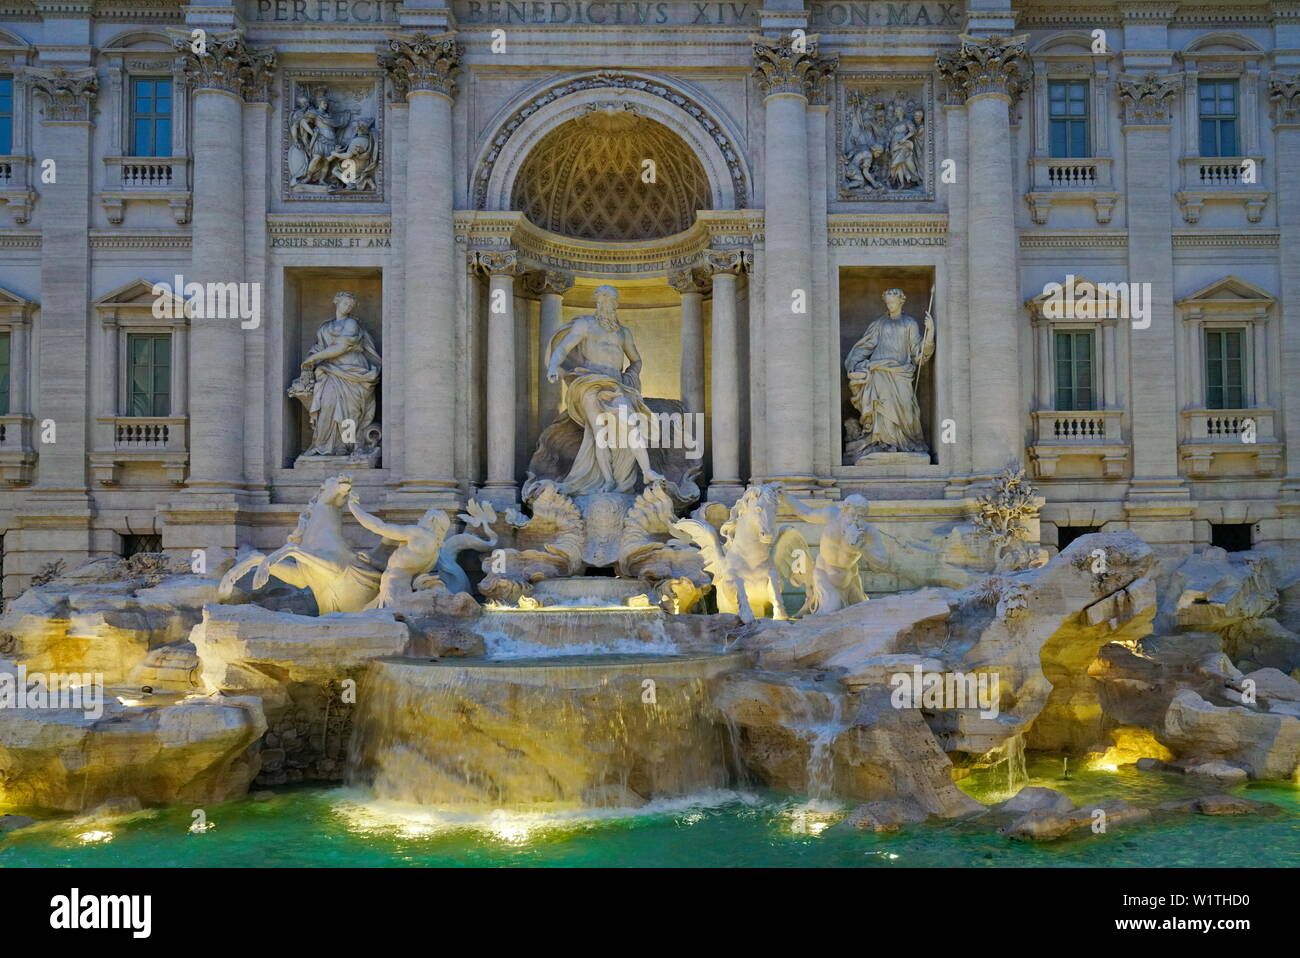 Famous and one of the most beautiful fountain of Rome - Trevi Fountain (Fontana di Trevi). Italy Stock Photo